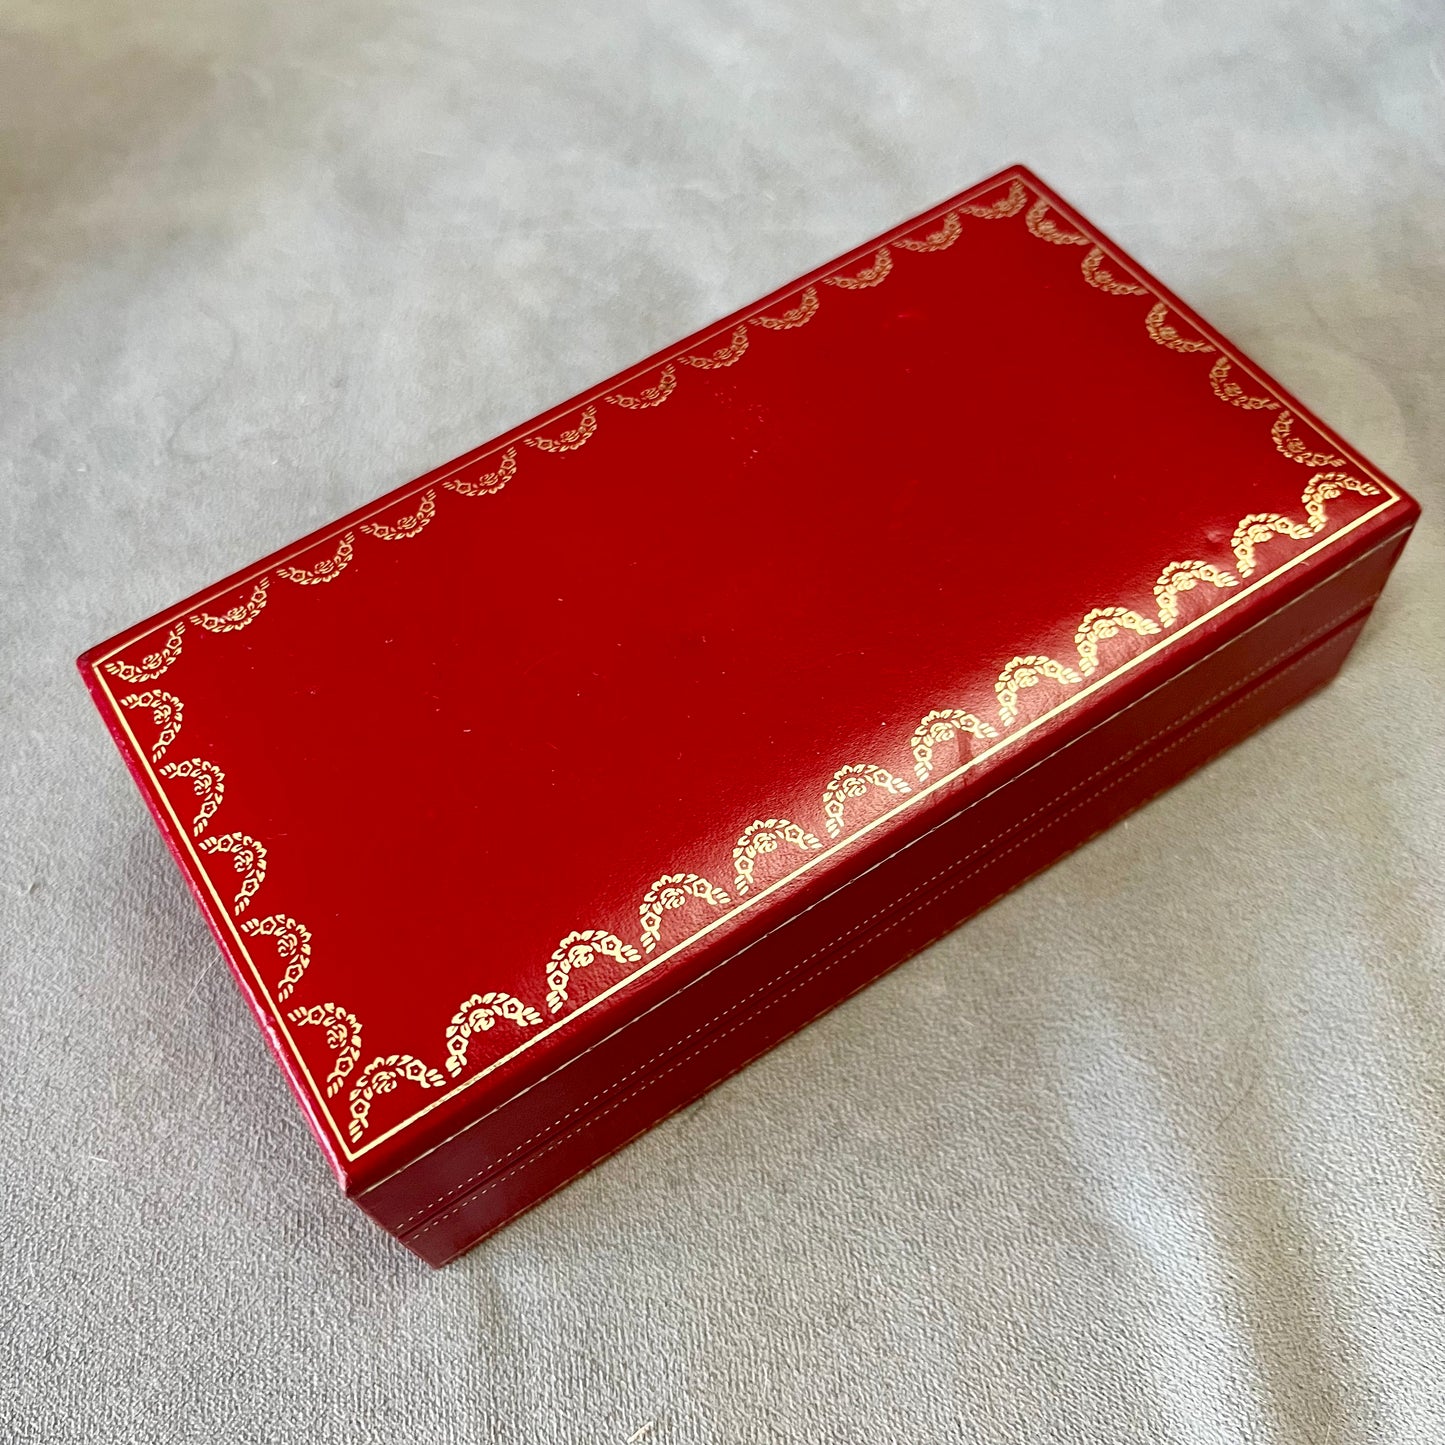 CARTIER Red Glasses Box